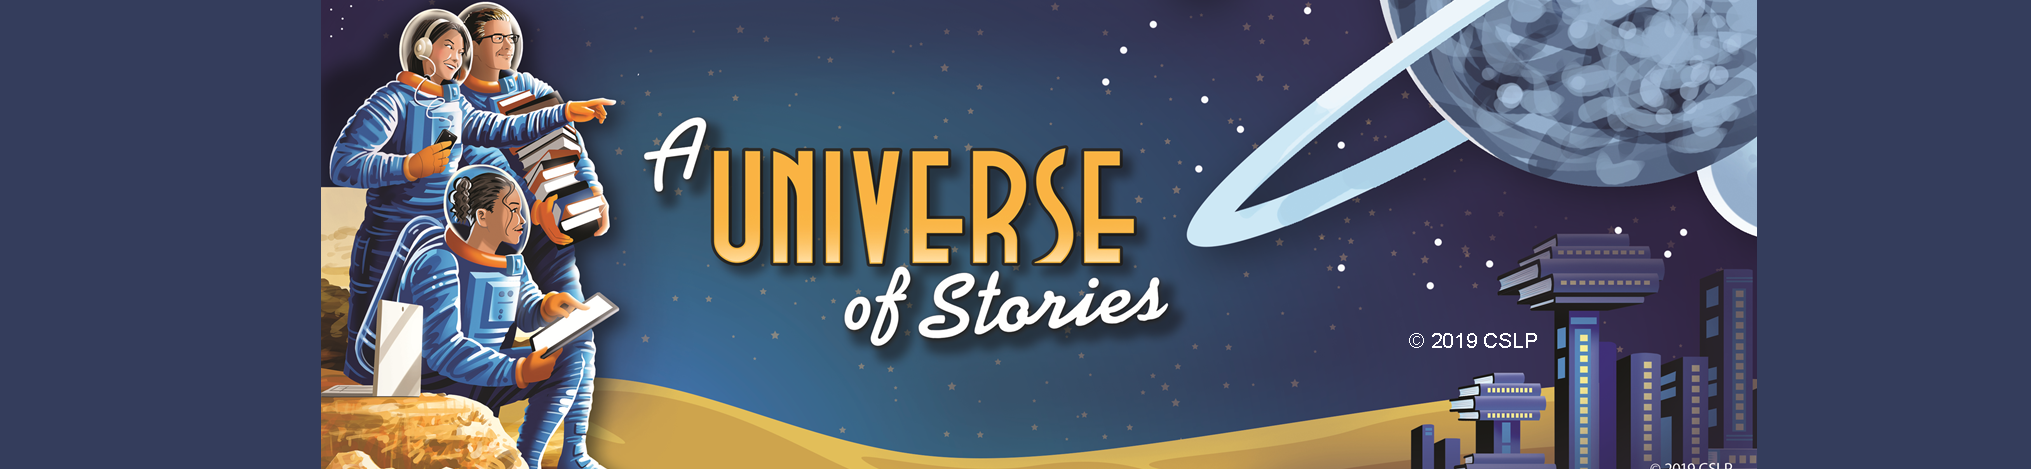 A Universe of Stories Banner, copyright 2019 CSLP.